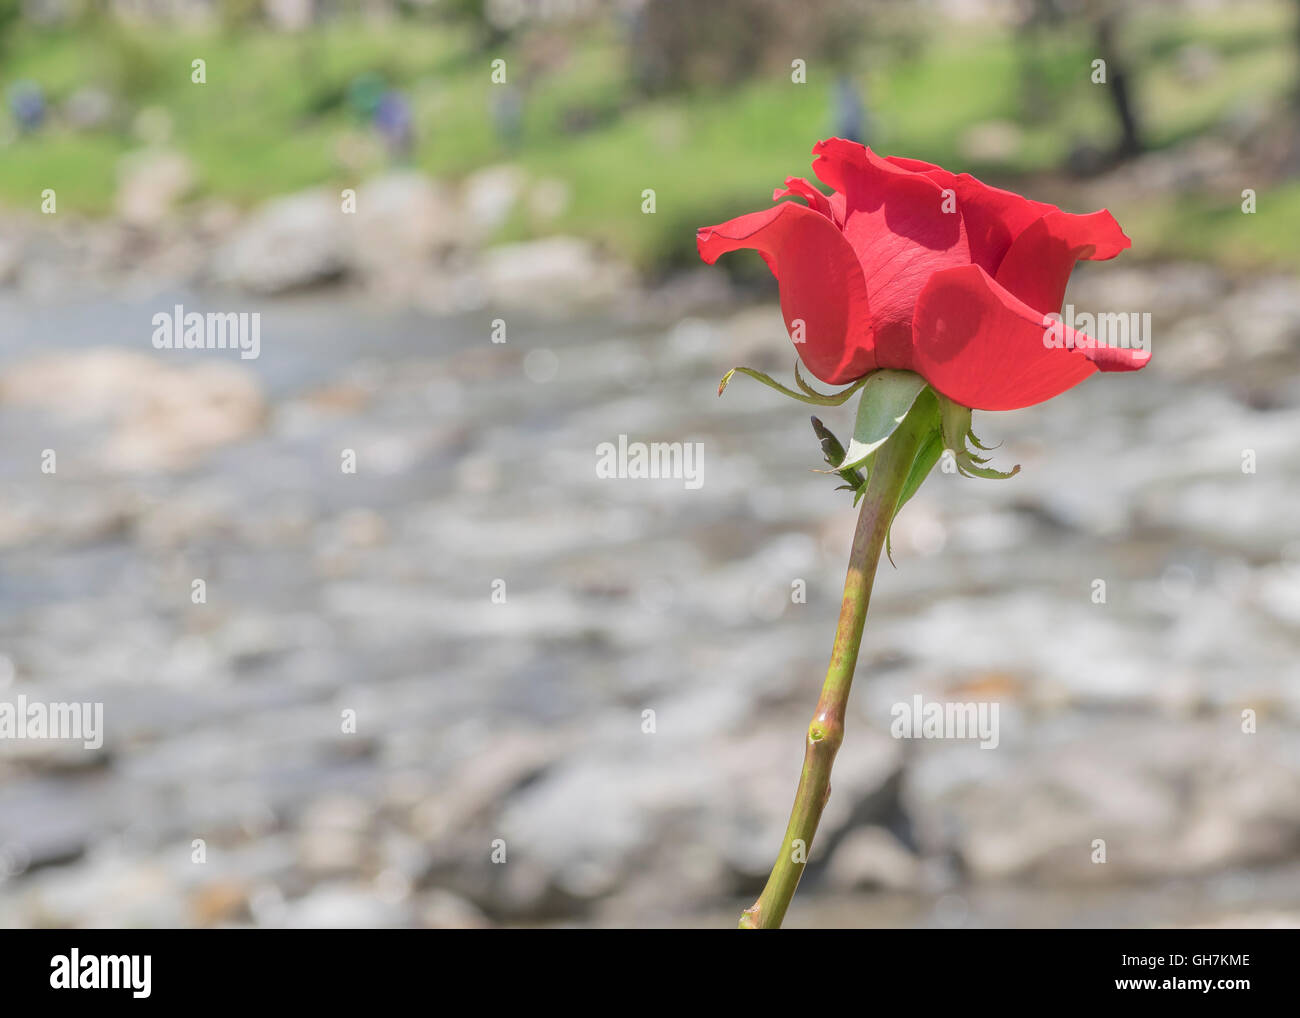 Romantic or poetic conceptual photography of red rose against blurred river background Stock Photo